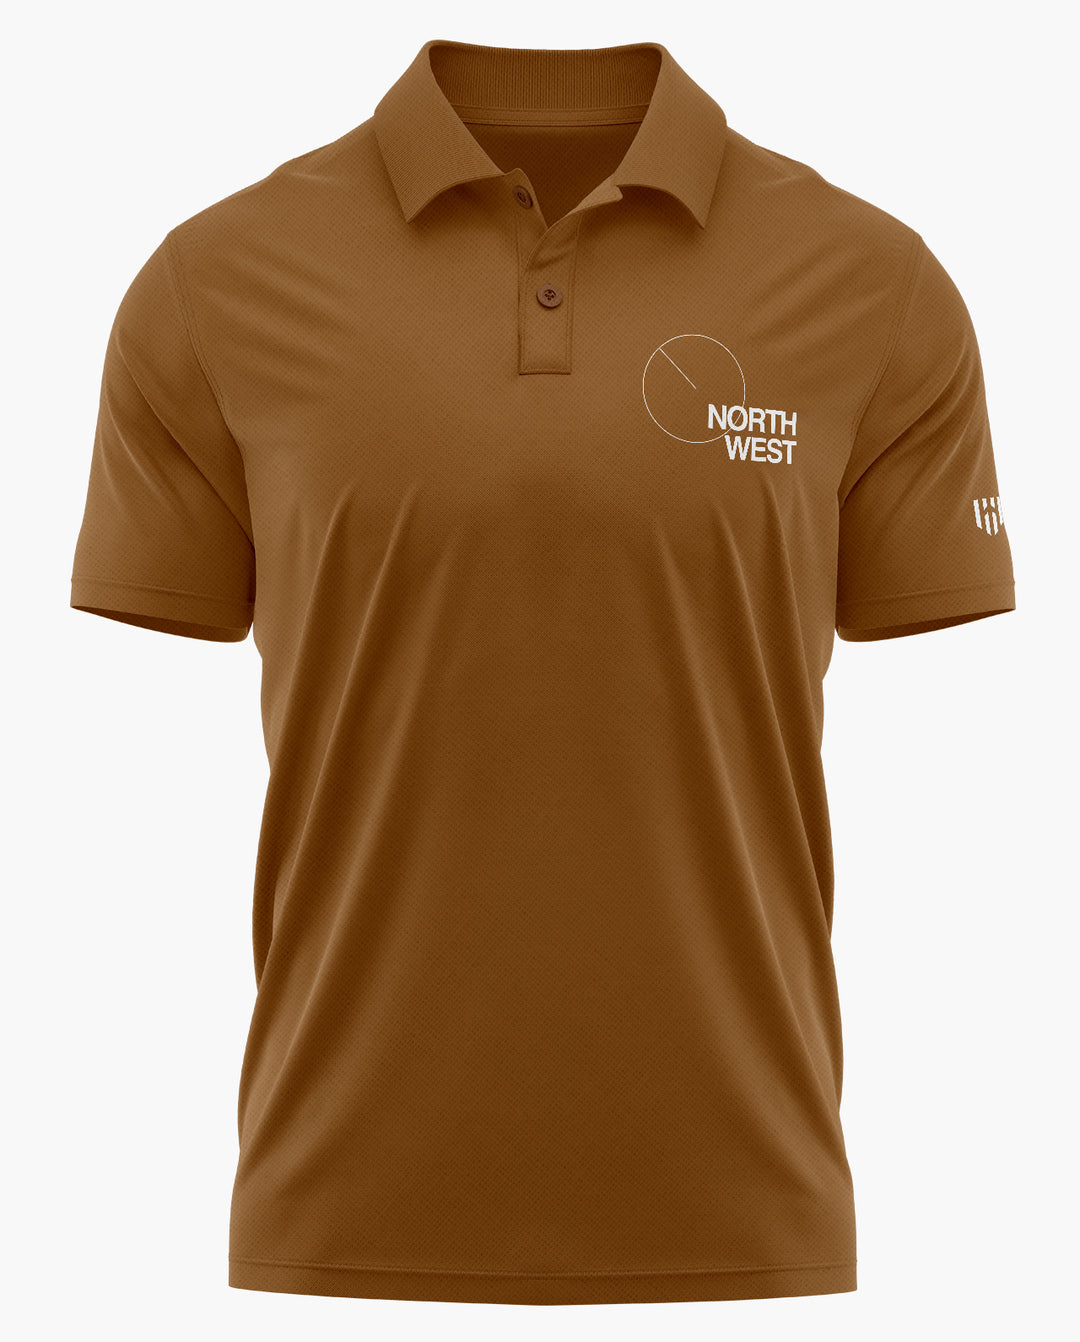 Direction North West Polo T-Shirt - Aero Armour